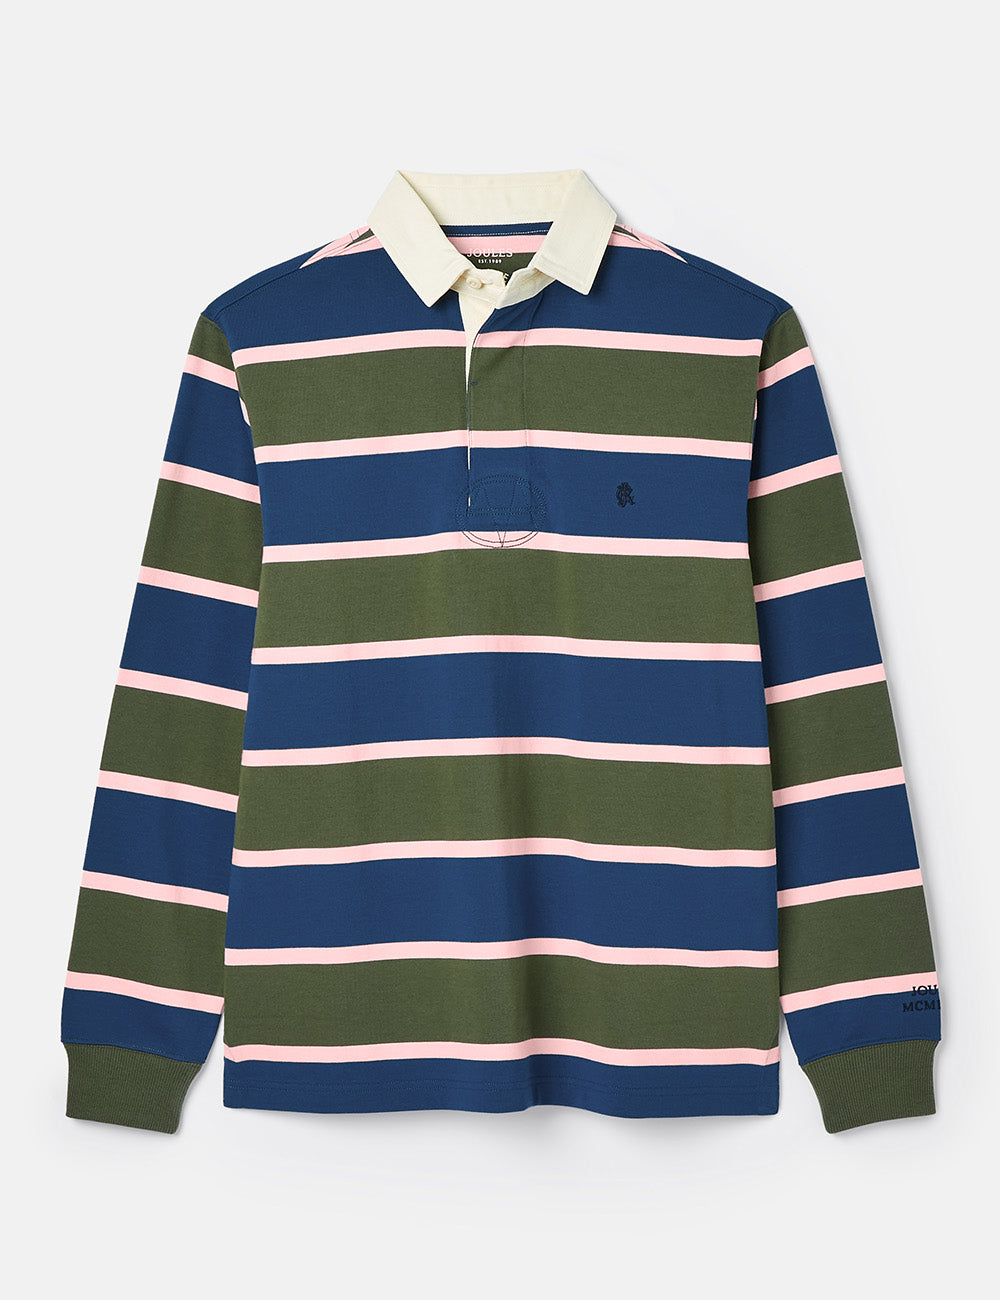 Joules Onside Rugby Shirt - Green/Navy Stripe